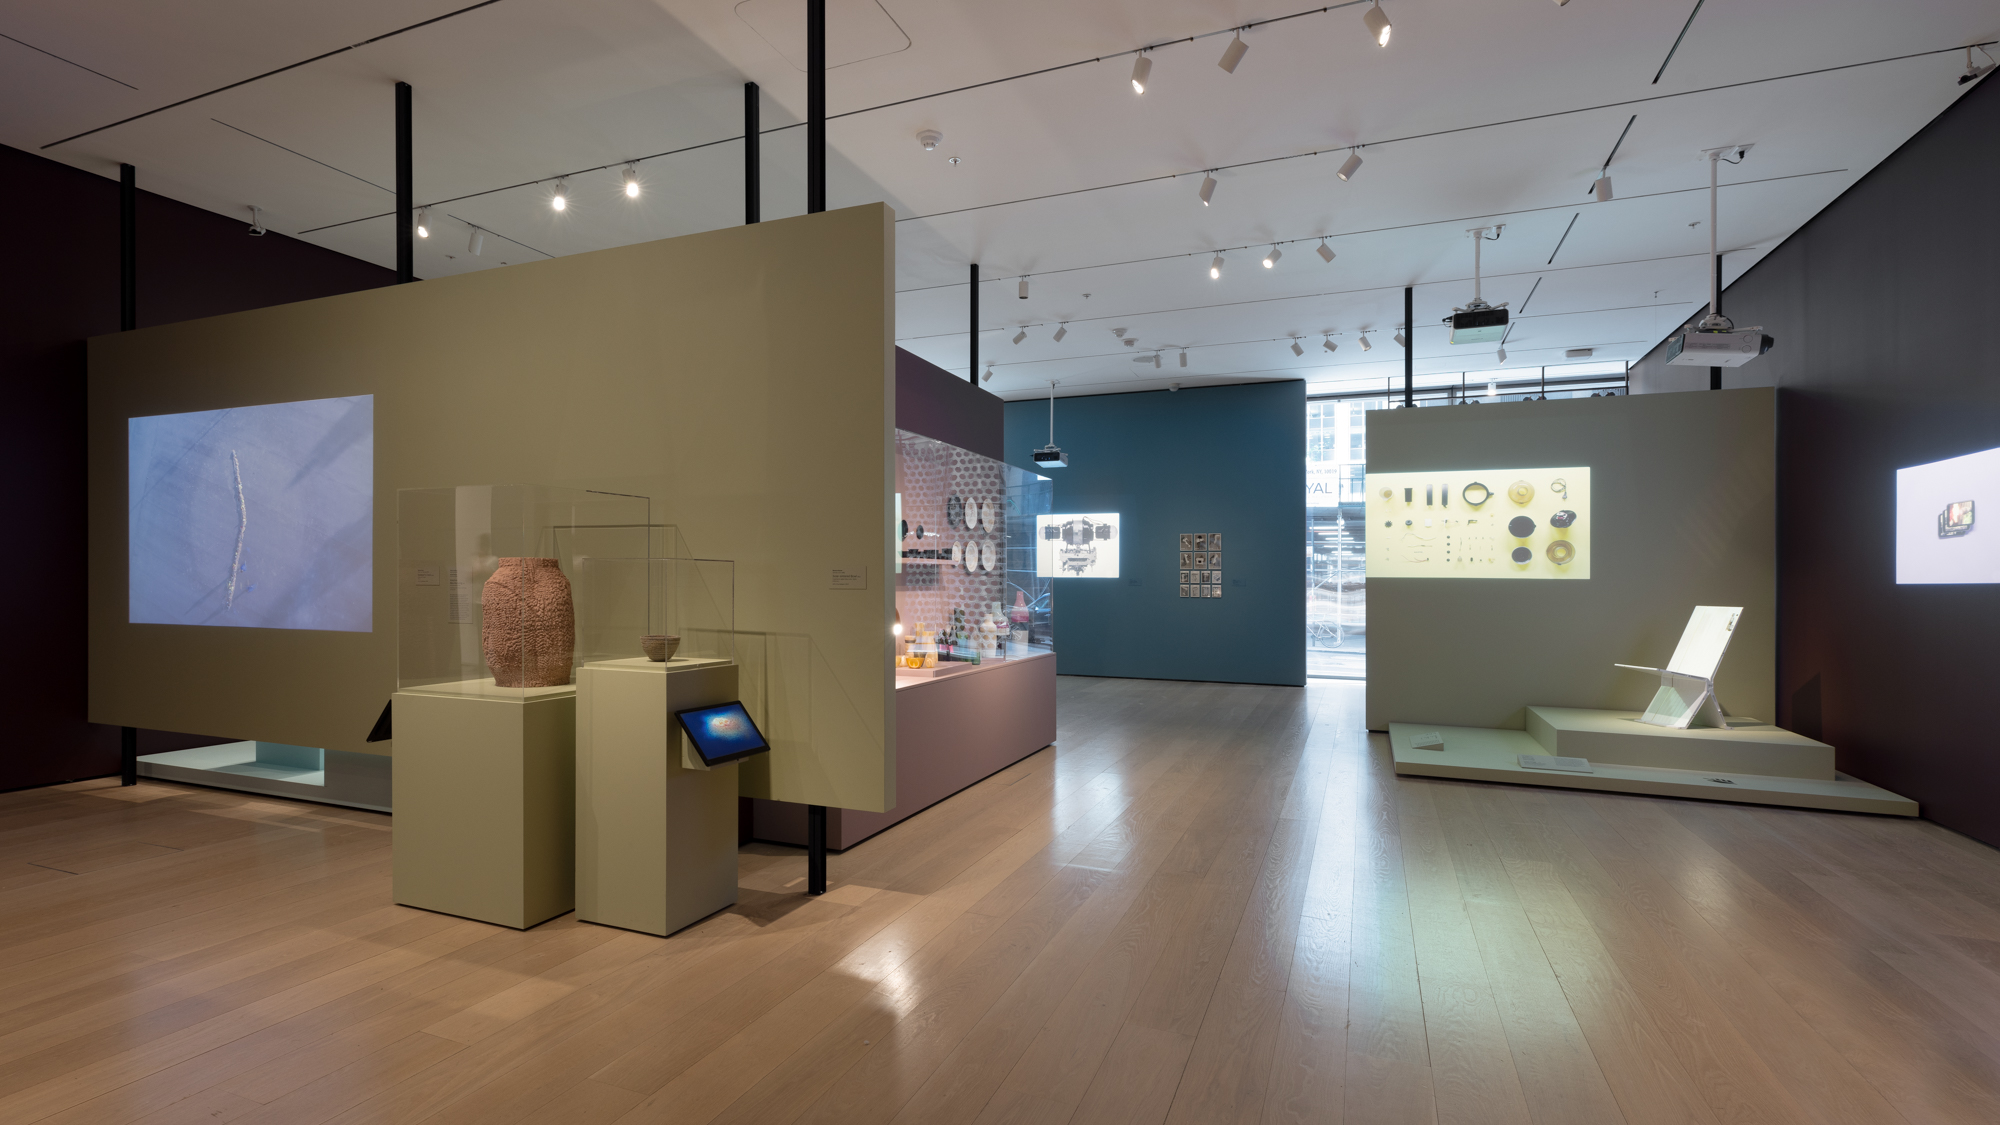 A room contains a variety of vases, glasses, and works from the MoMA exhibition “Life Cycles: The Materials of Contemporary Design.”